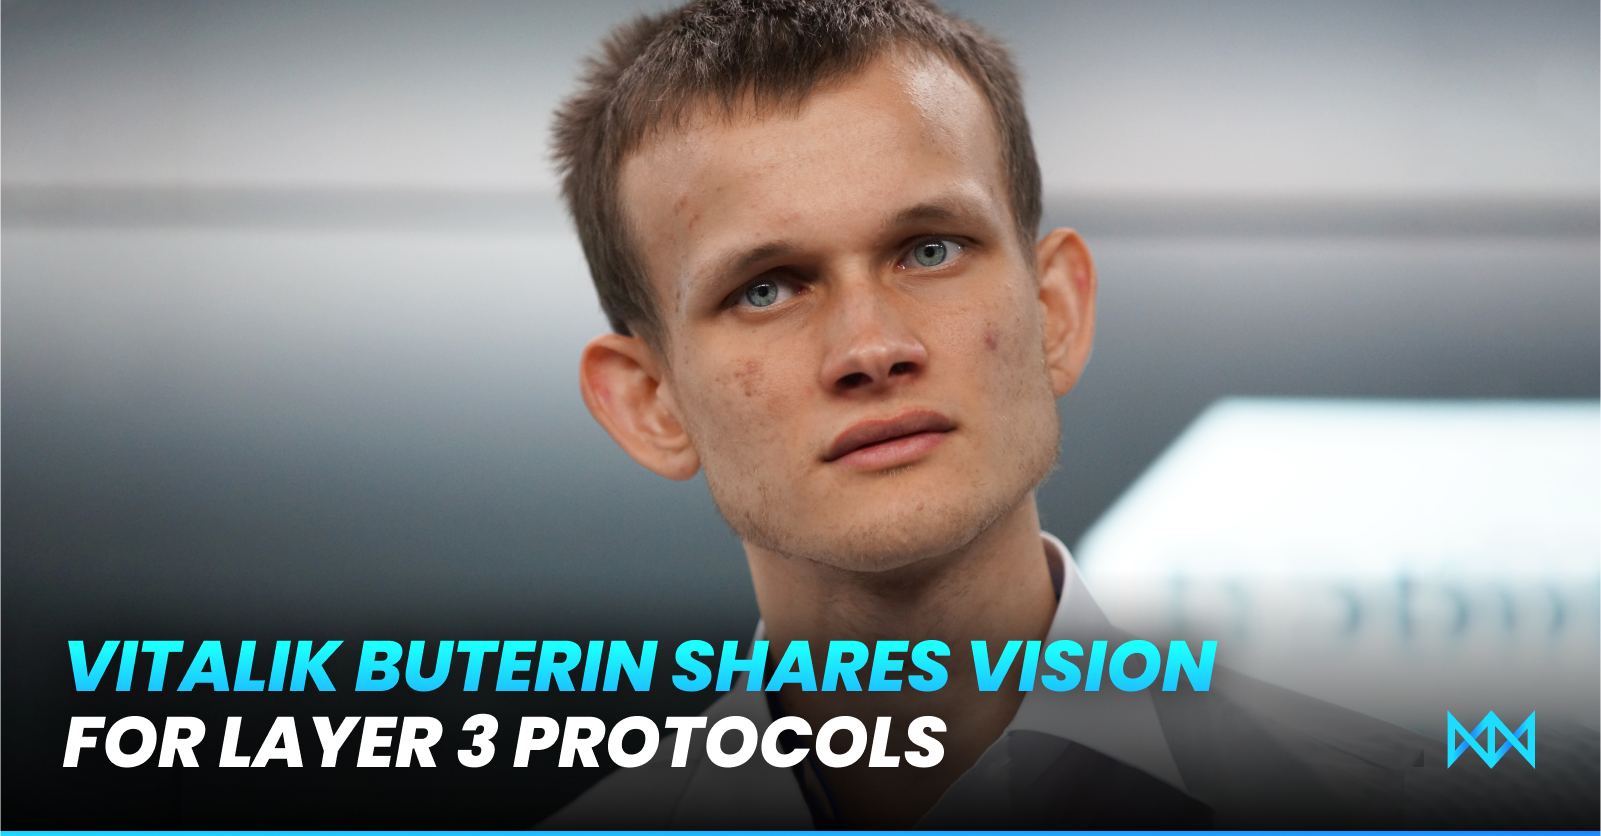 Ethereum Co-founder Vitalik Buterin shares a vision for layer 3 protocols